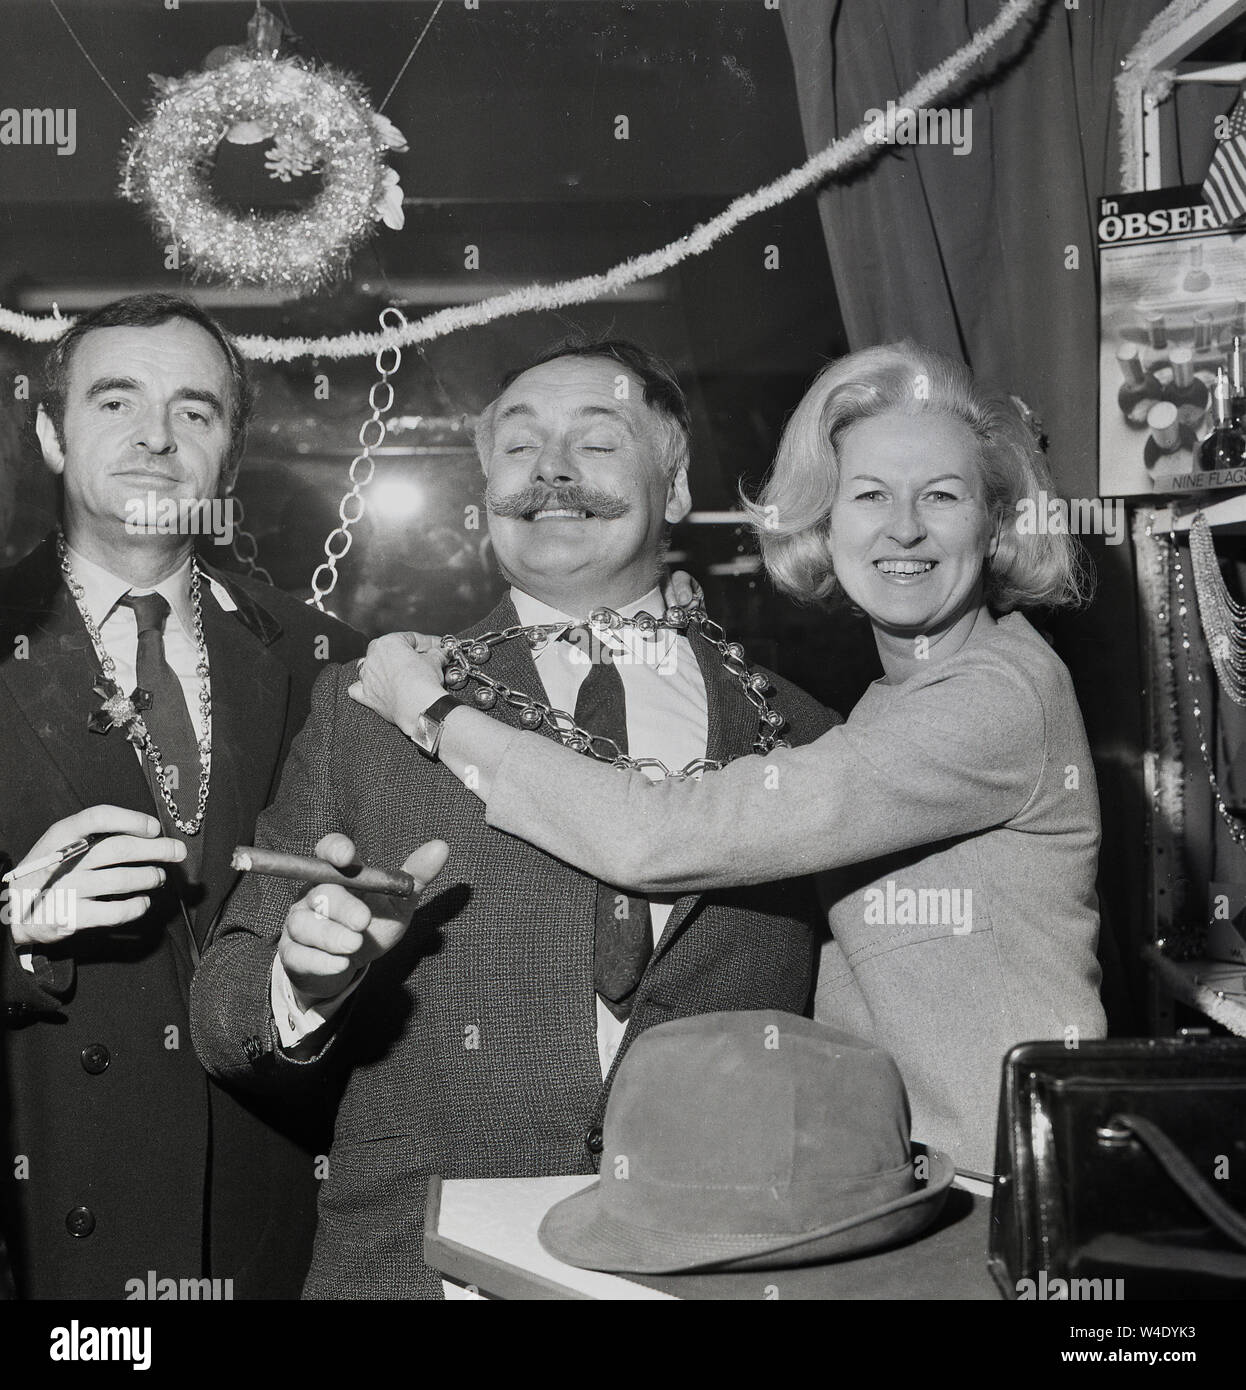 1960s, historical, comedy stars of the radio panel game, 'Does The Team Think' seen here at a party  with Jimmy Edwards, the creator the game on the right, smoking a large cigar, London, England, UK. Edwards was famous for his 'handlebar' moustache. The popular panel game, a parody of 'Any Questions' was played for laughs and ran for nearly twenty years. Stock Photo